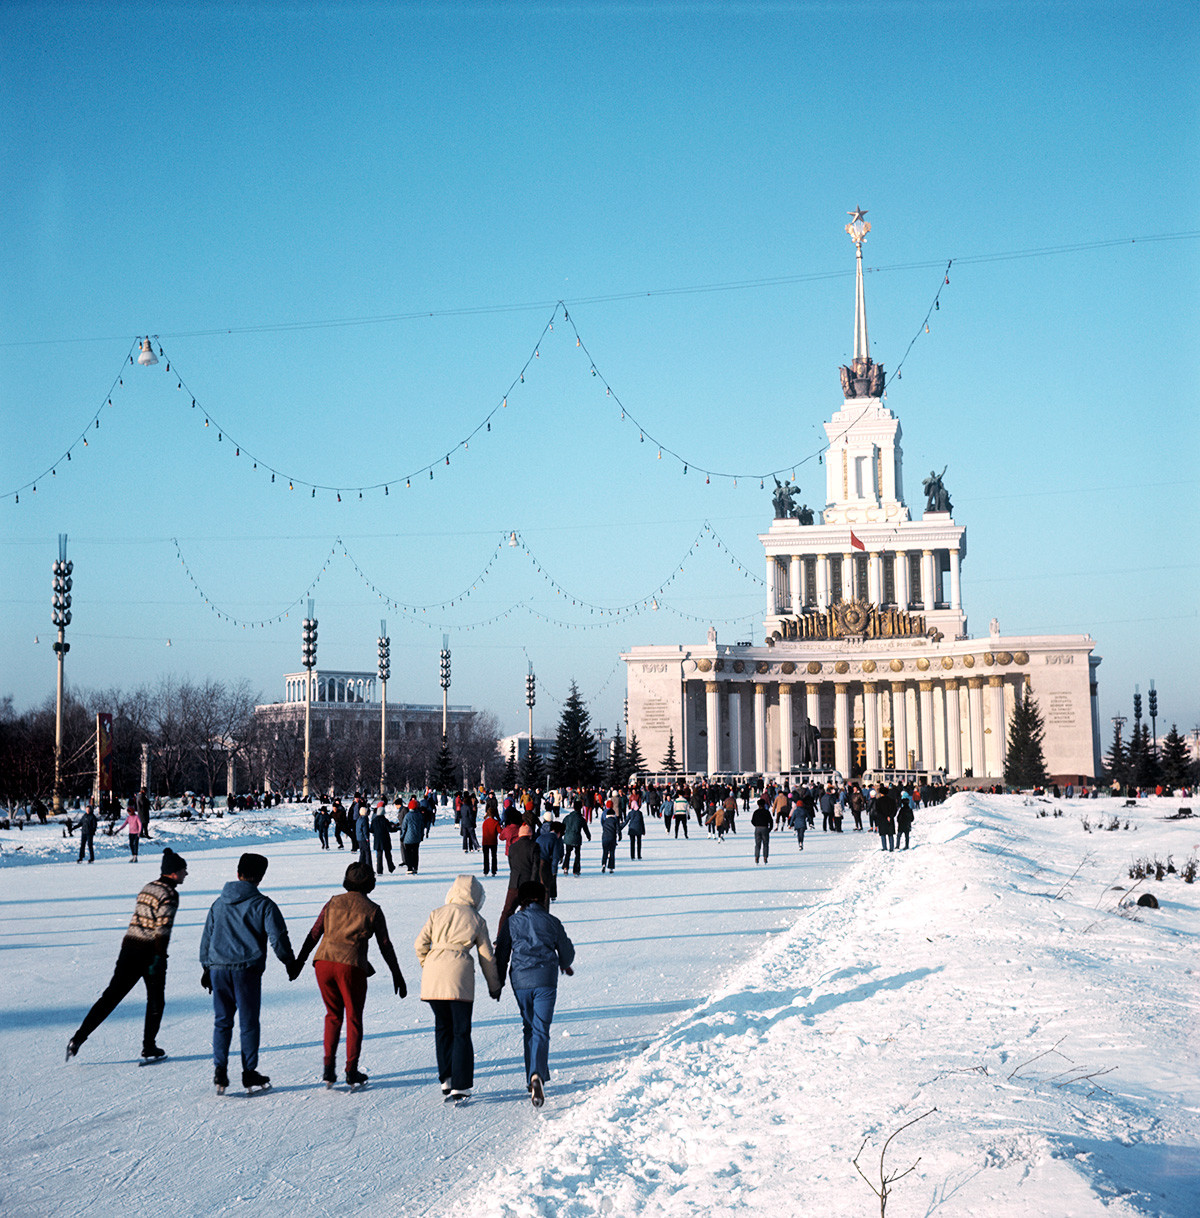 Skating at VDNKH Exhibition grounds, 1974